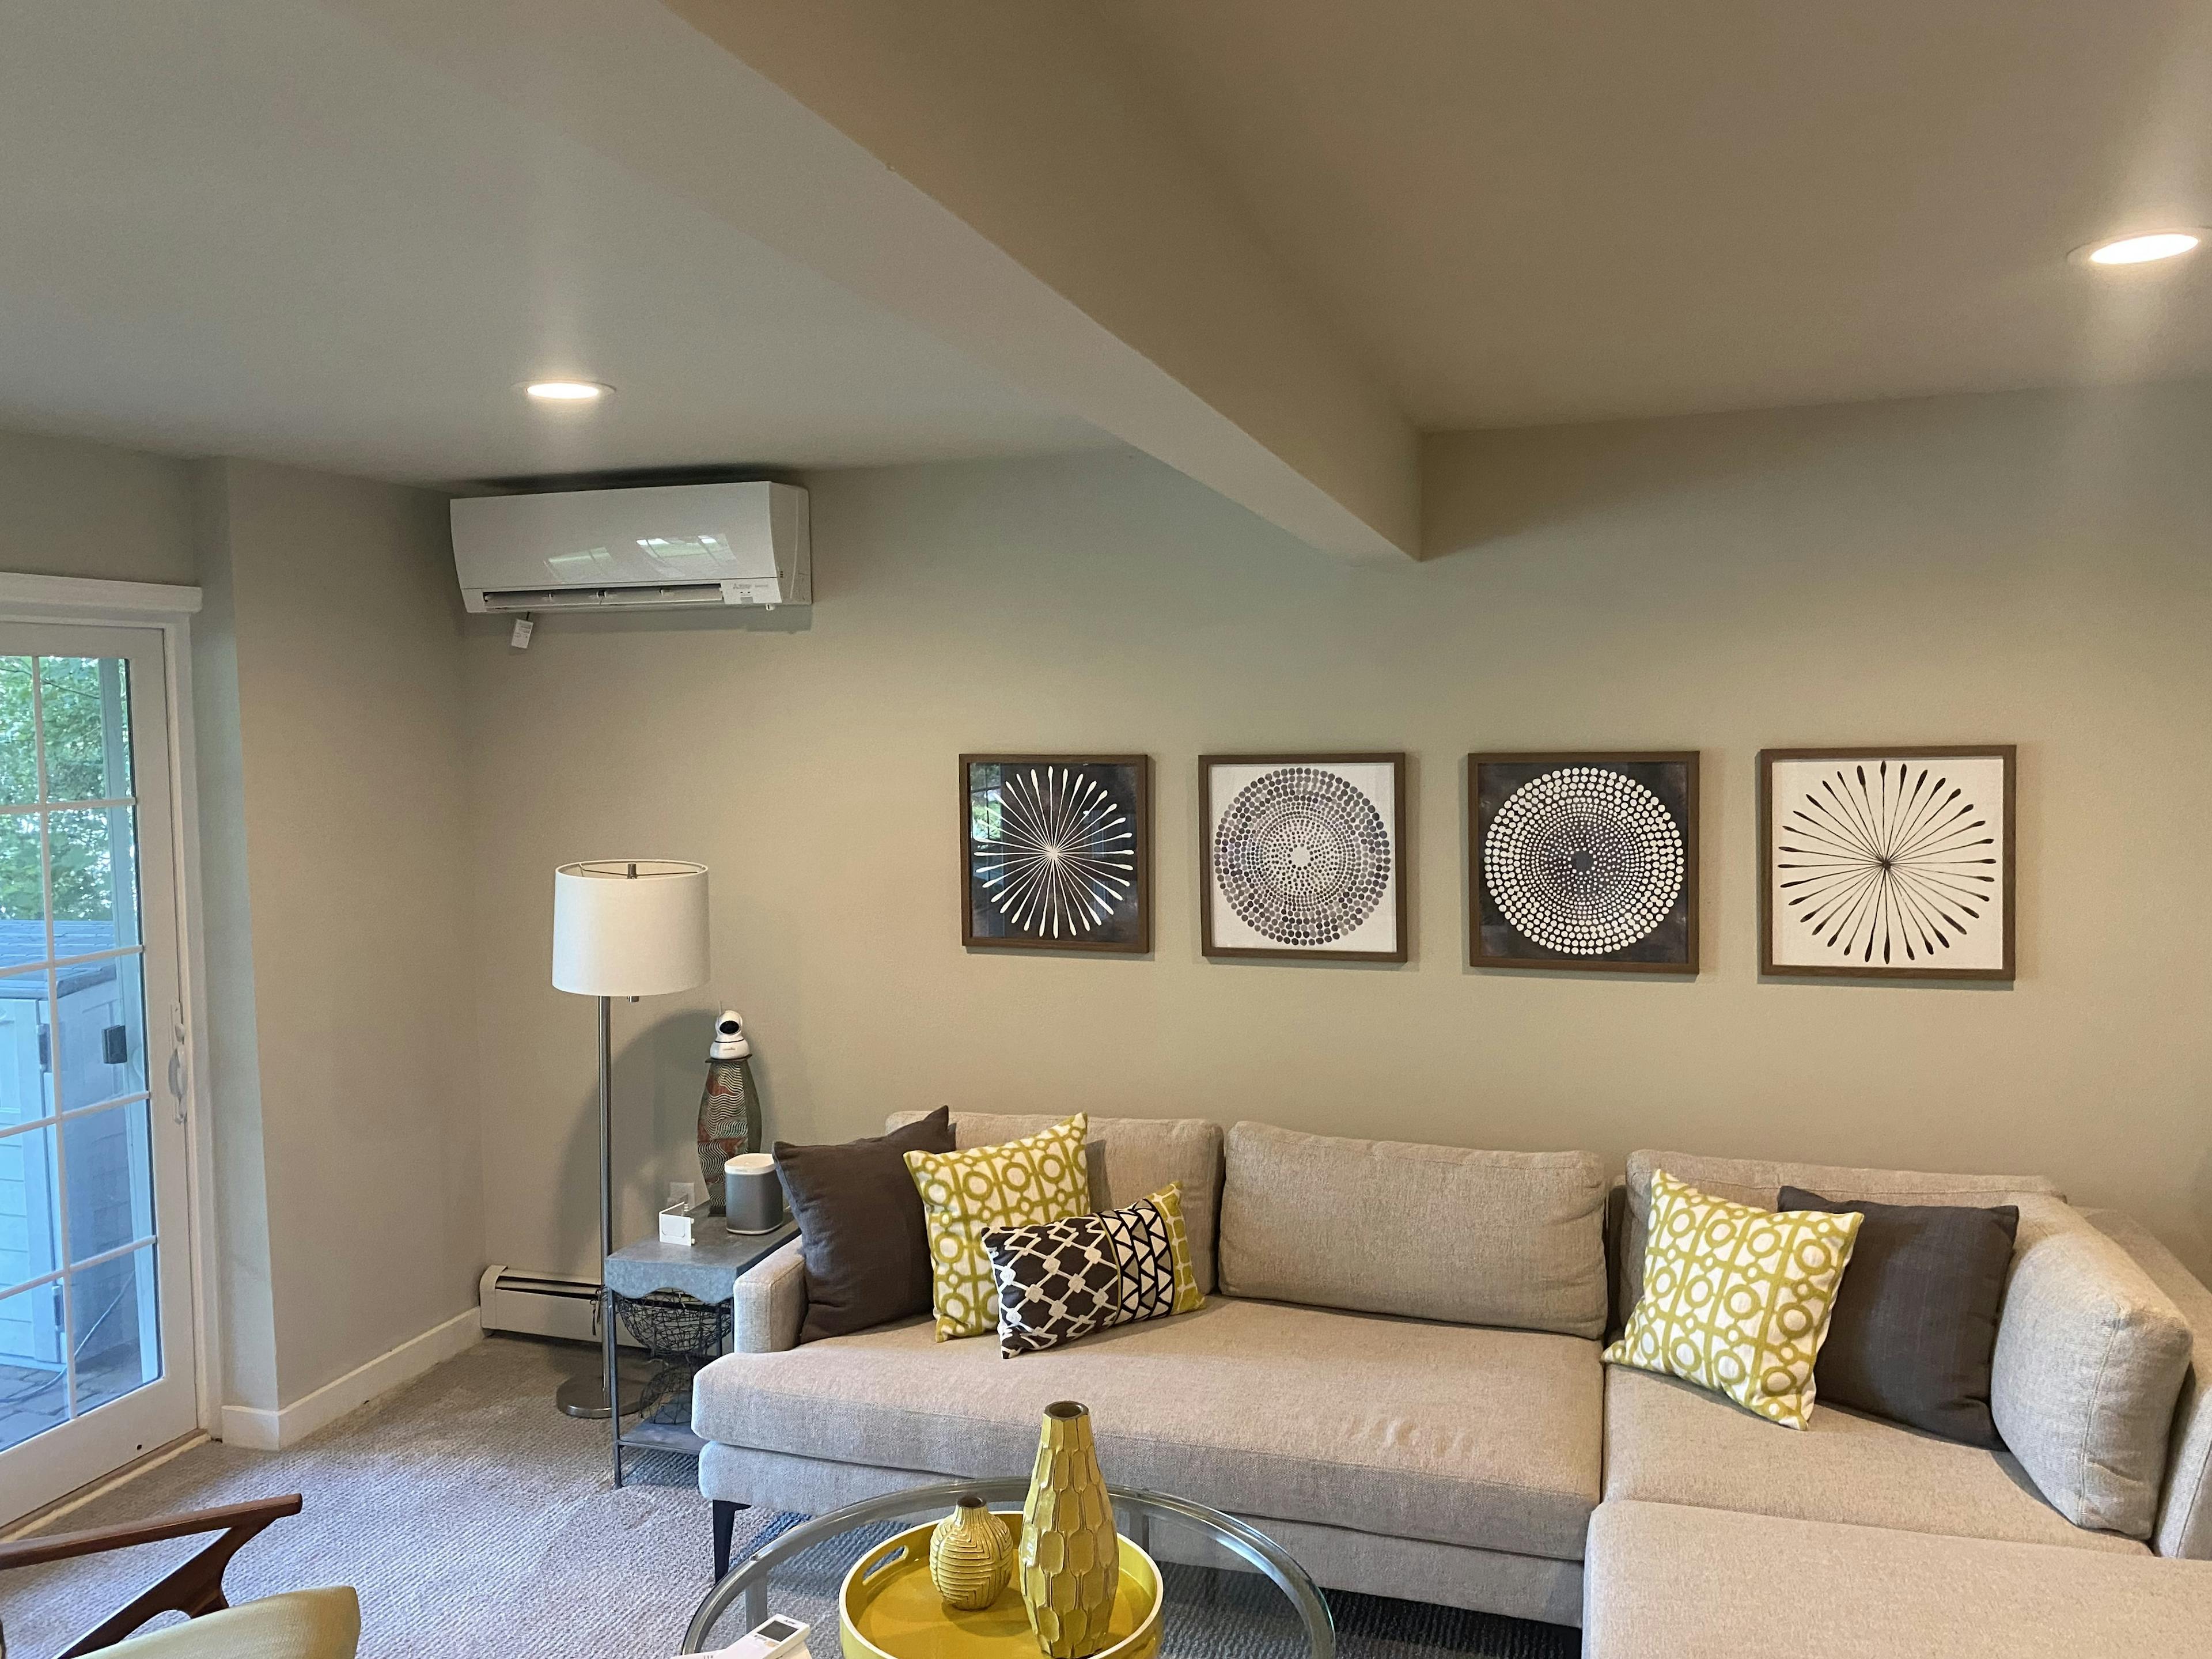 Living room with ductless heating & cooling system